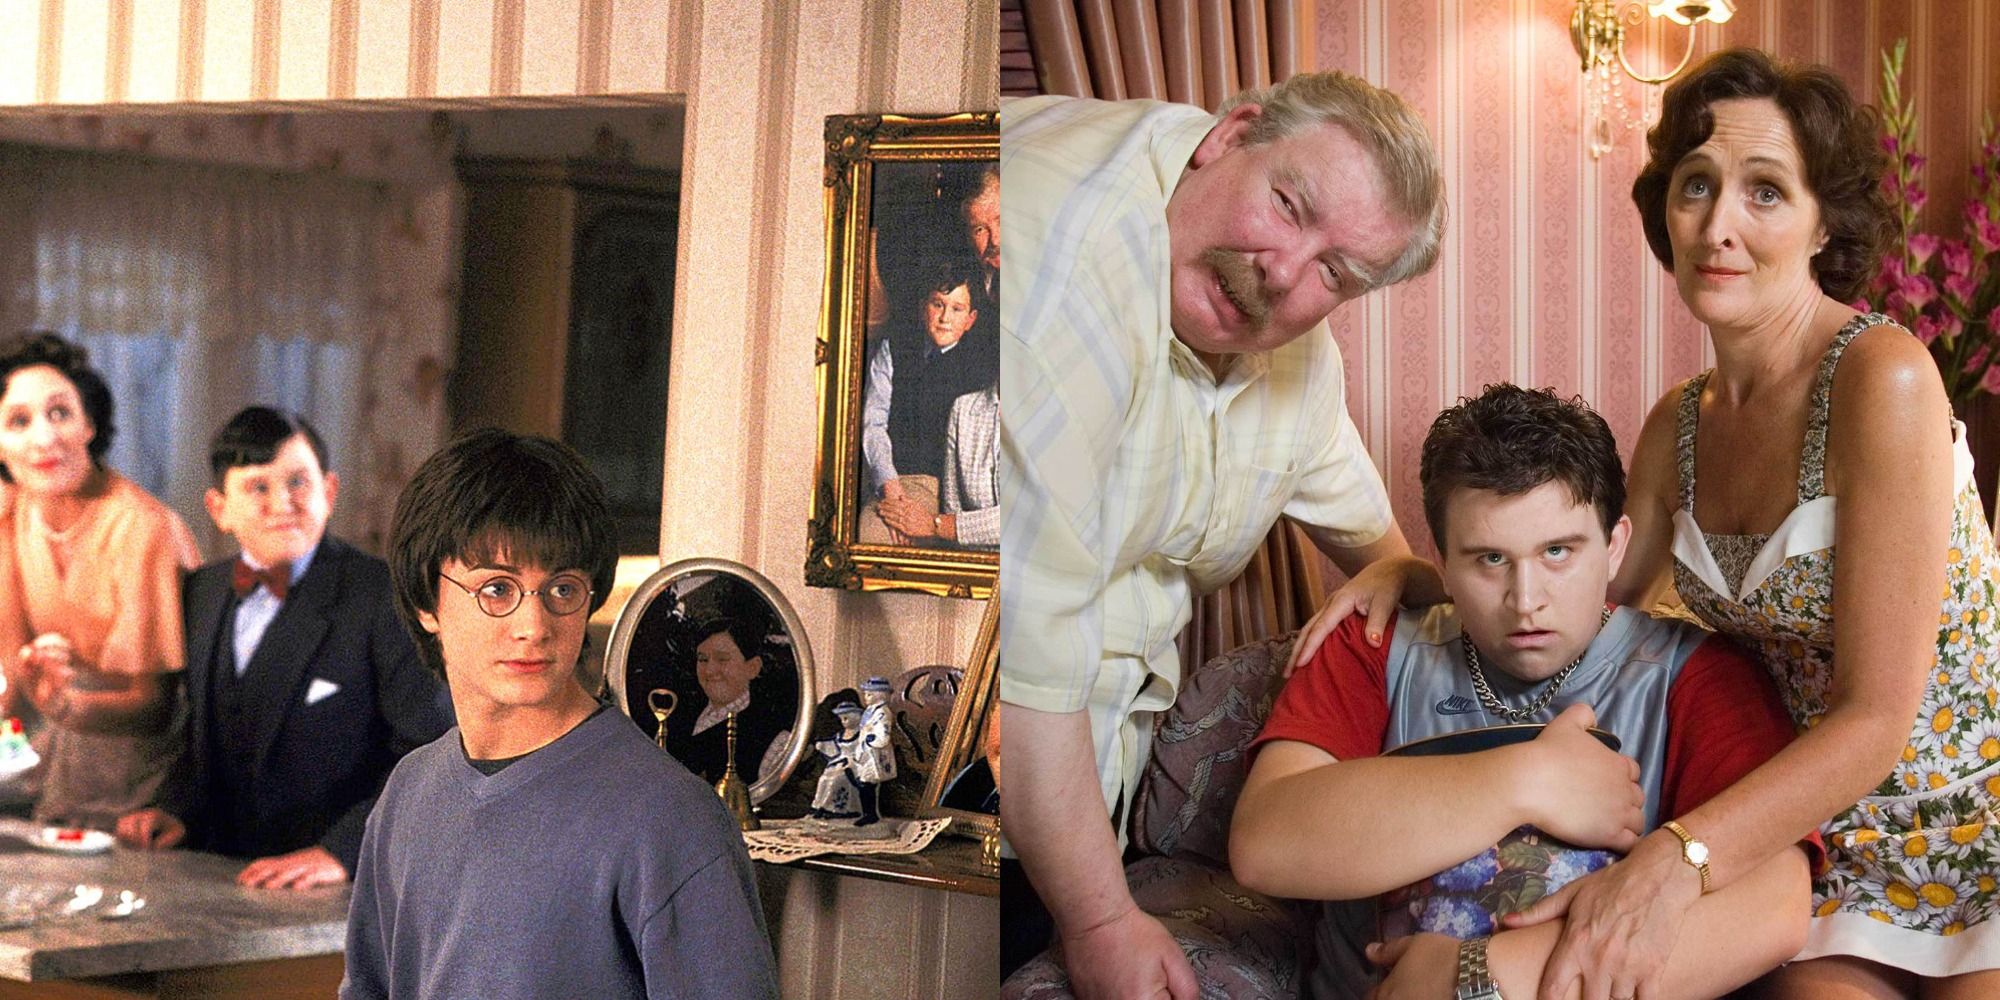 A split image showing Harry at the Dursleys' house on the left and Vernon, Petunia and Dudley on the right from Harry Potter